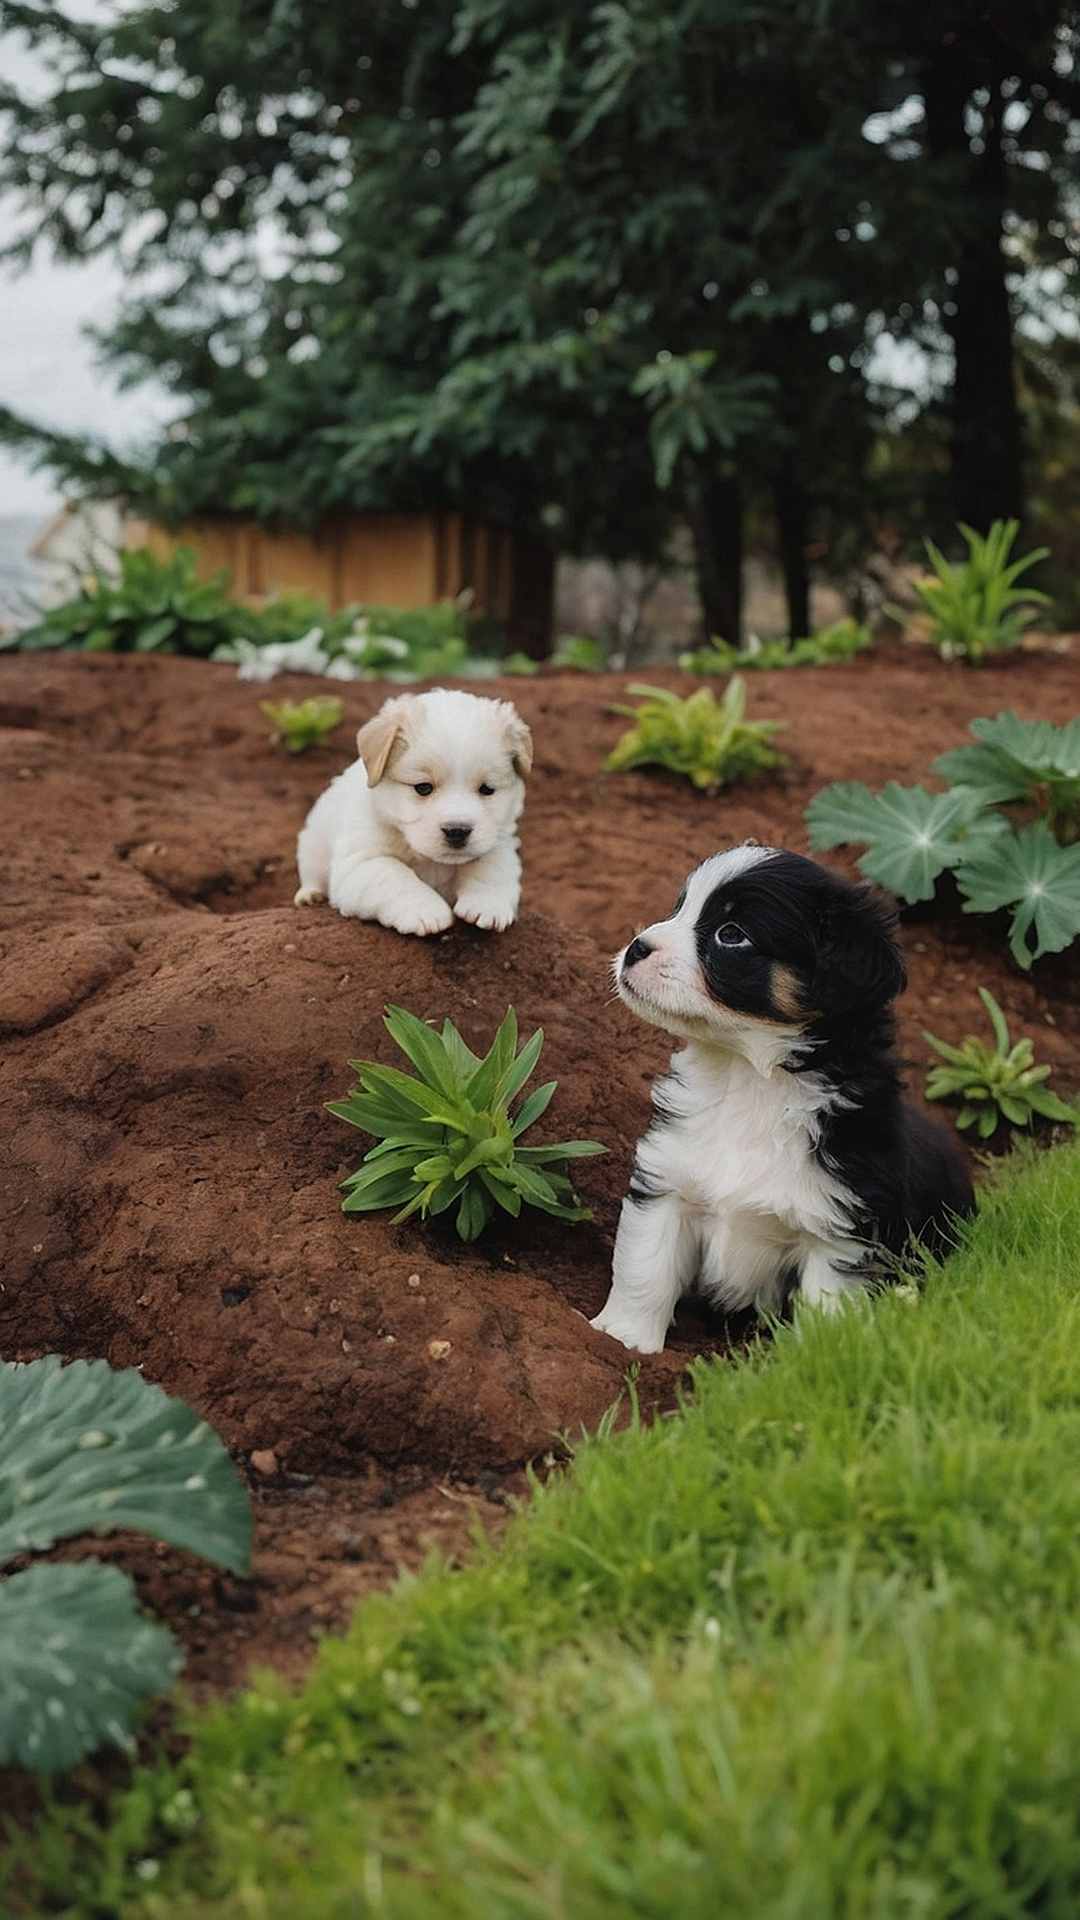 Puppy Power: 15 Irresistible Images